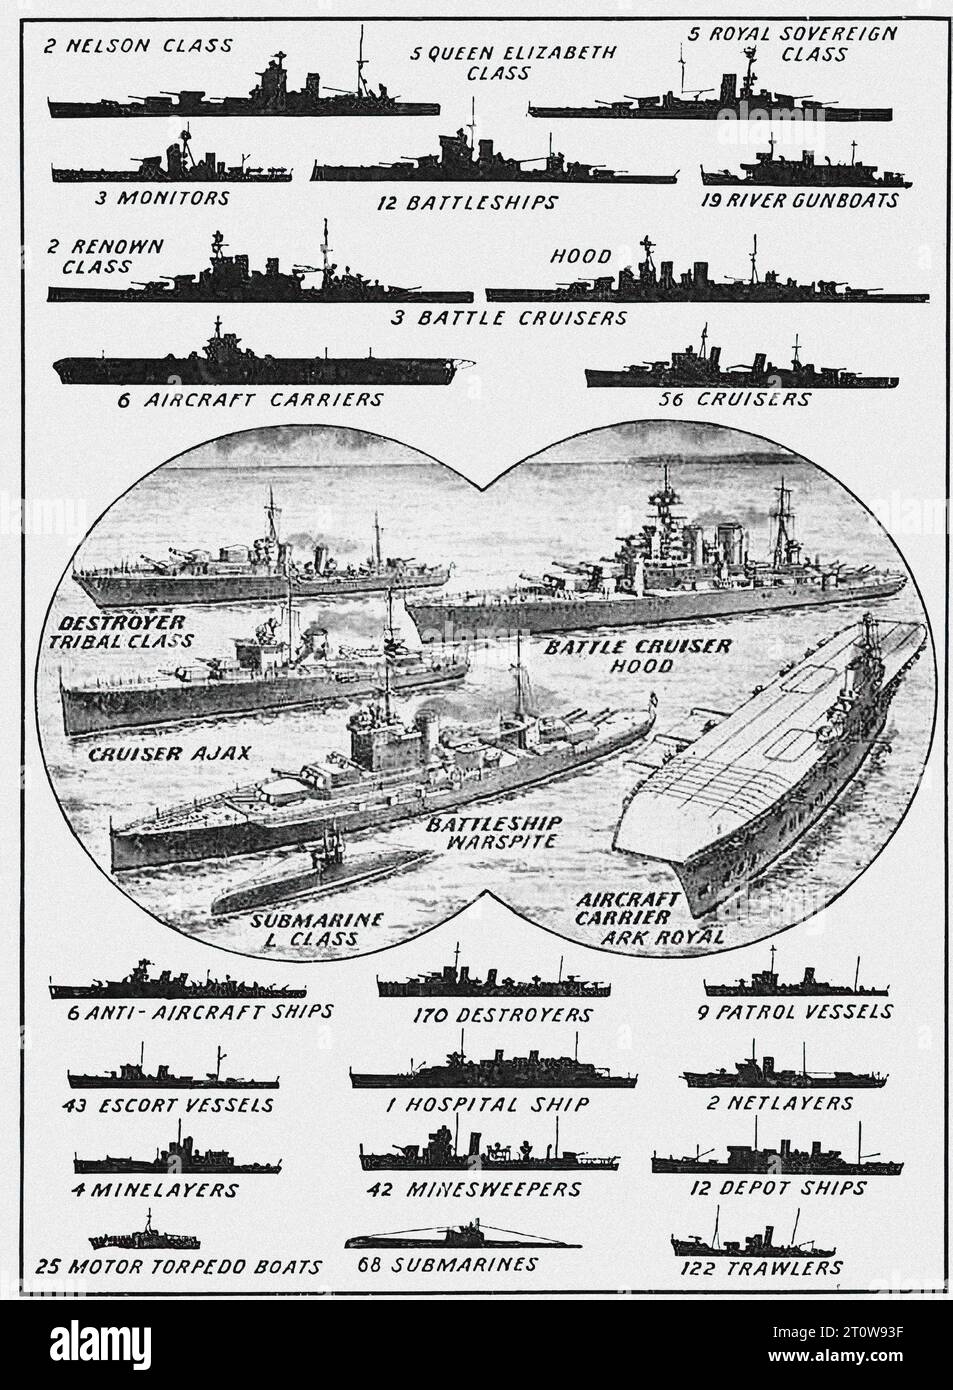 Illustrated Armament Description, British Newspaper - United Kingdom, Second World War : The image is a black and white diagram of various types of naval ships. It’s divided into two parts; the top part displays silhouettes of different ship types with their names and numbers, while the bottom part illustrates a naval shipyard with various docked ships and their names. The image features 12 different ship types, including battleships, cruisers, destroyers, submarines, and patrol vessels. Stock Photo